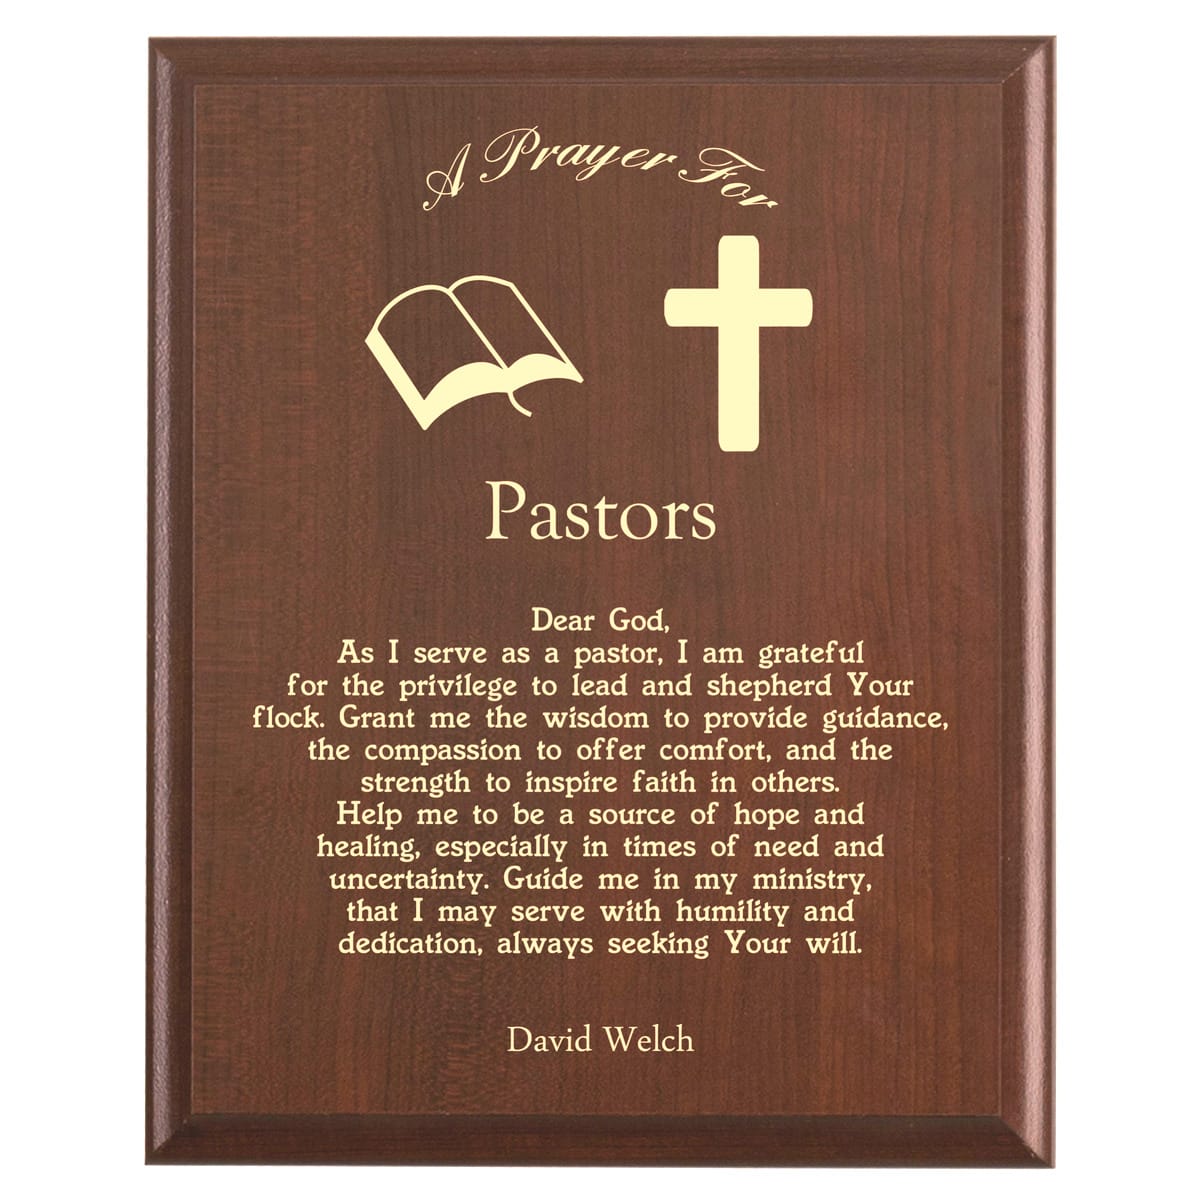 Plaque photo: Pastor  Prayer Plaque design with free personalization. Wood style finish with customized text.